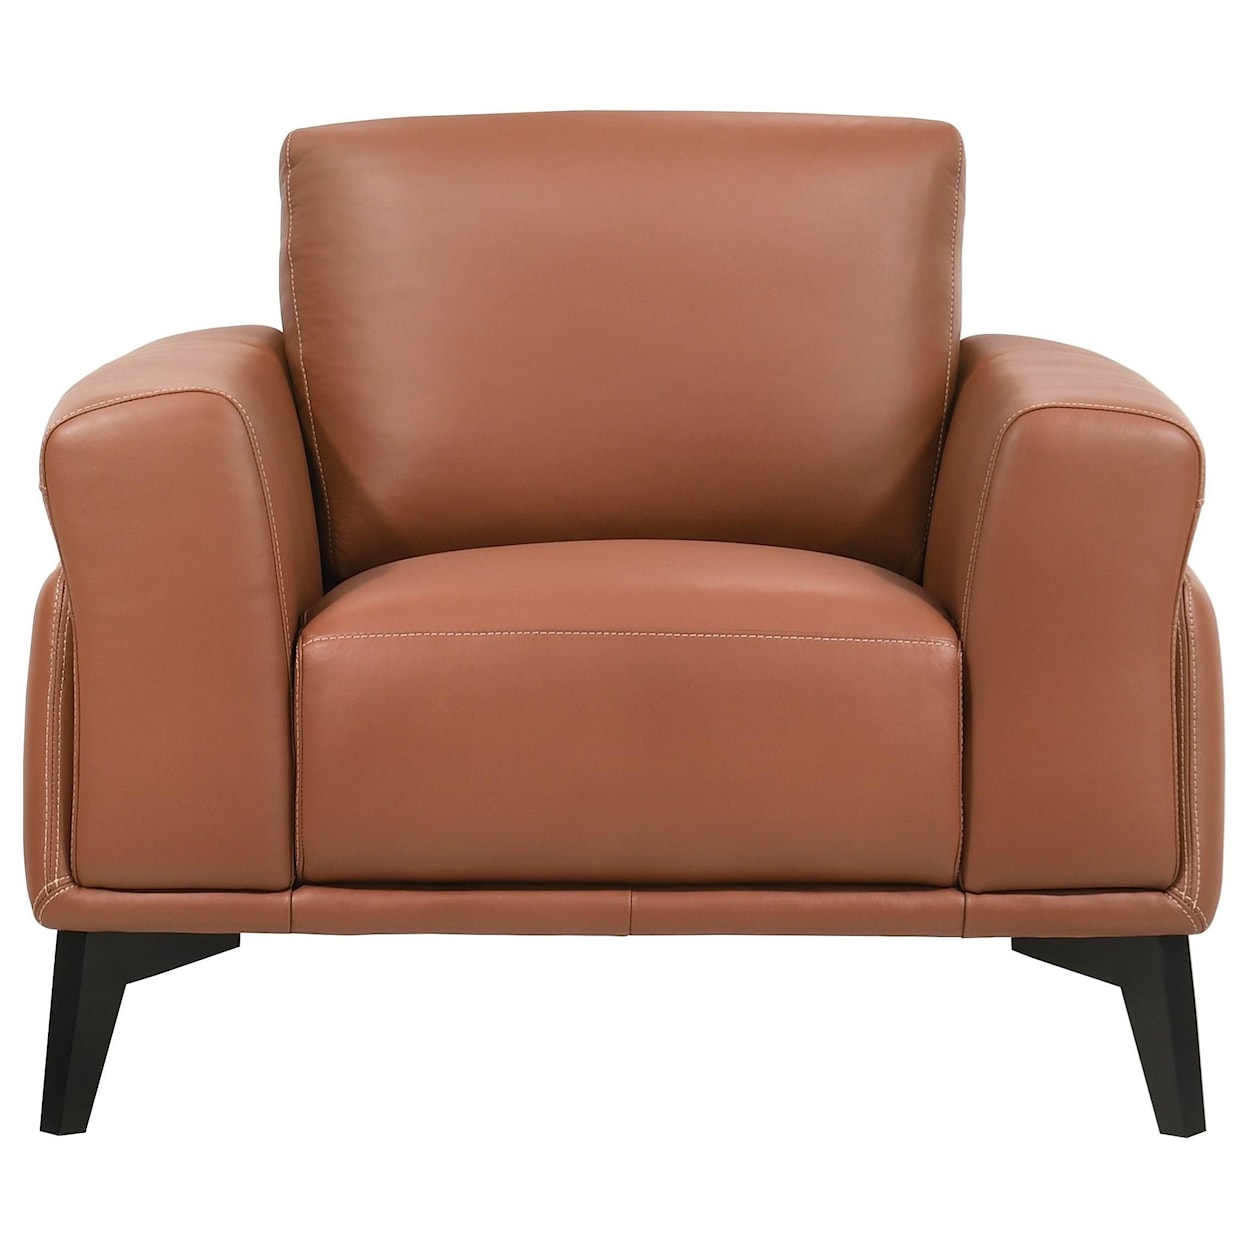 New Classic Como Upholstered Chair